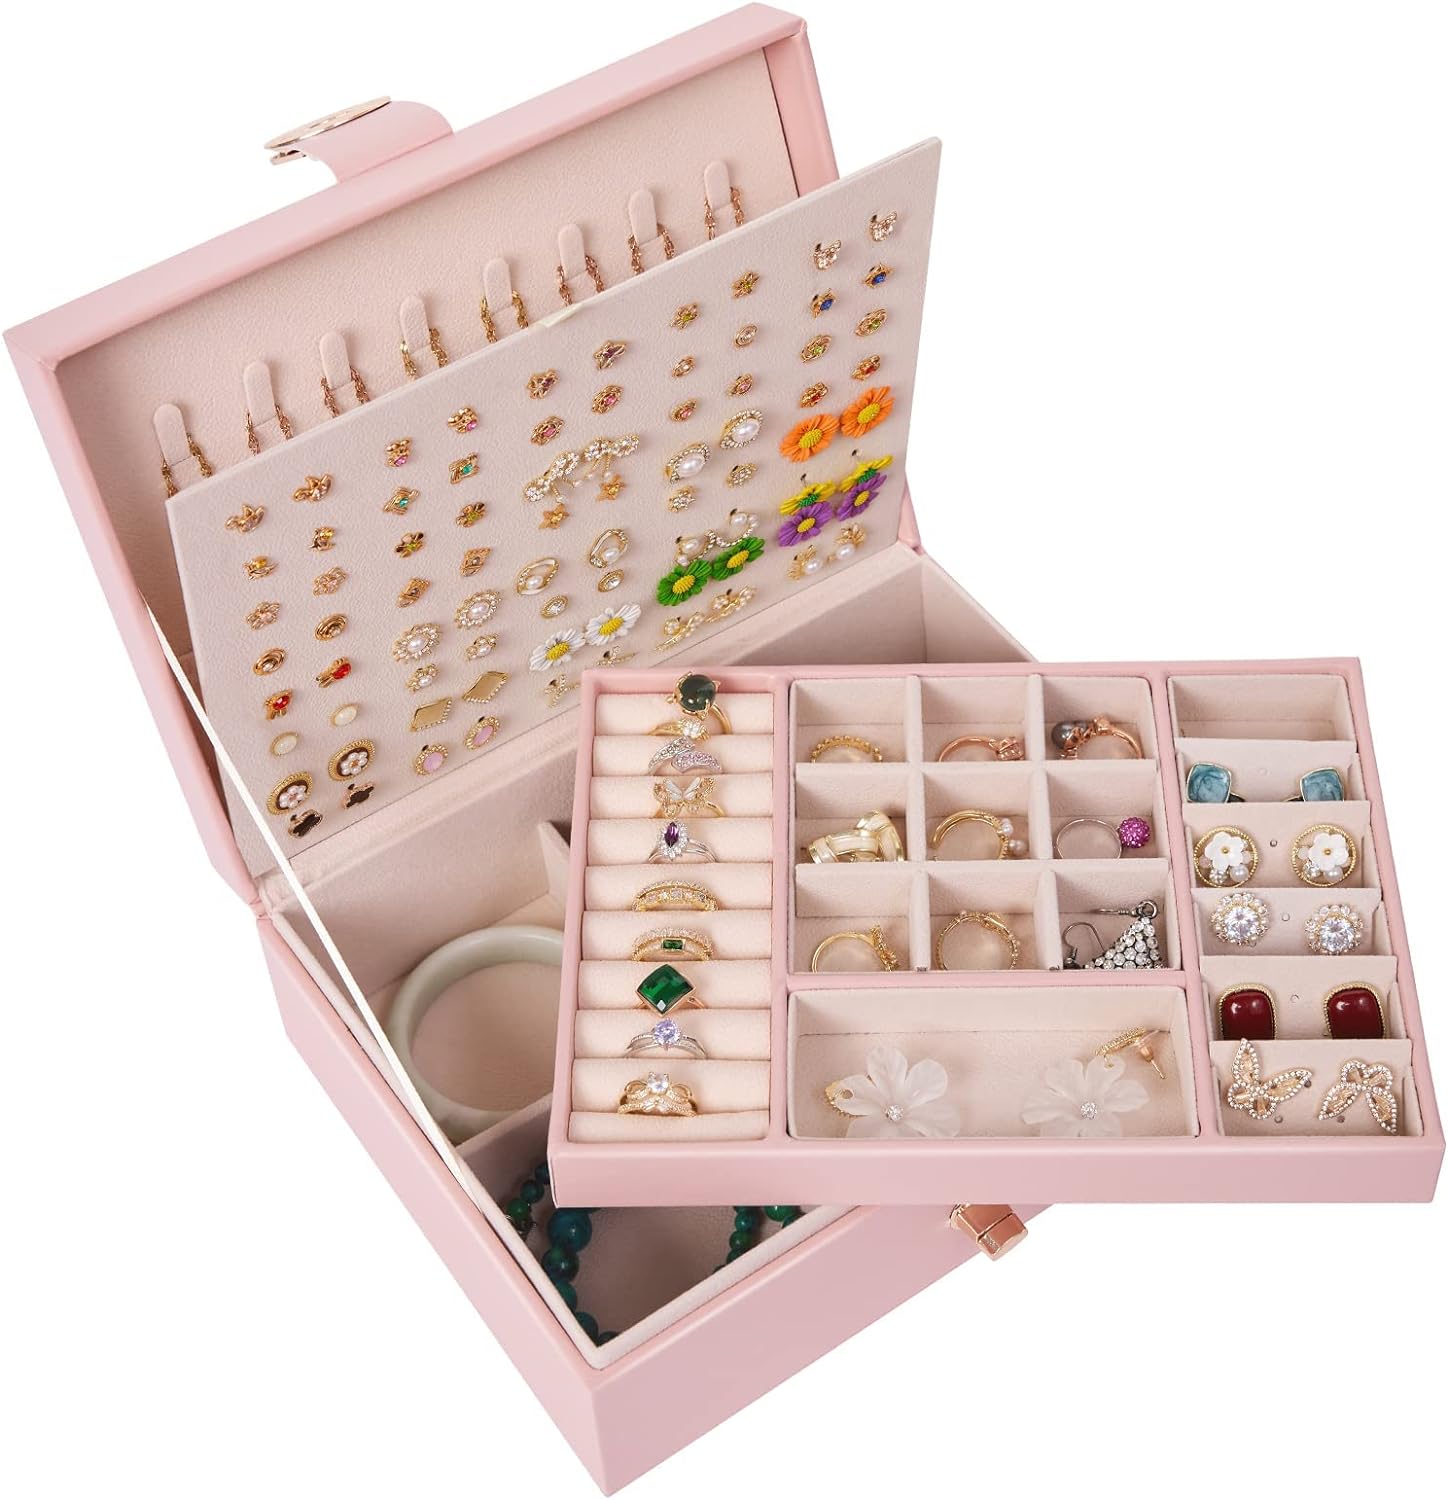 Jewelry Organizer for mothers day gift